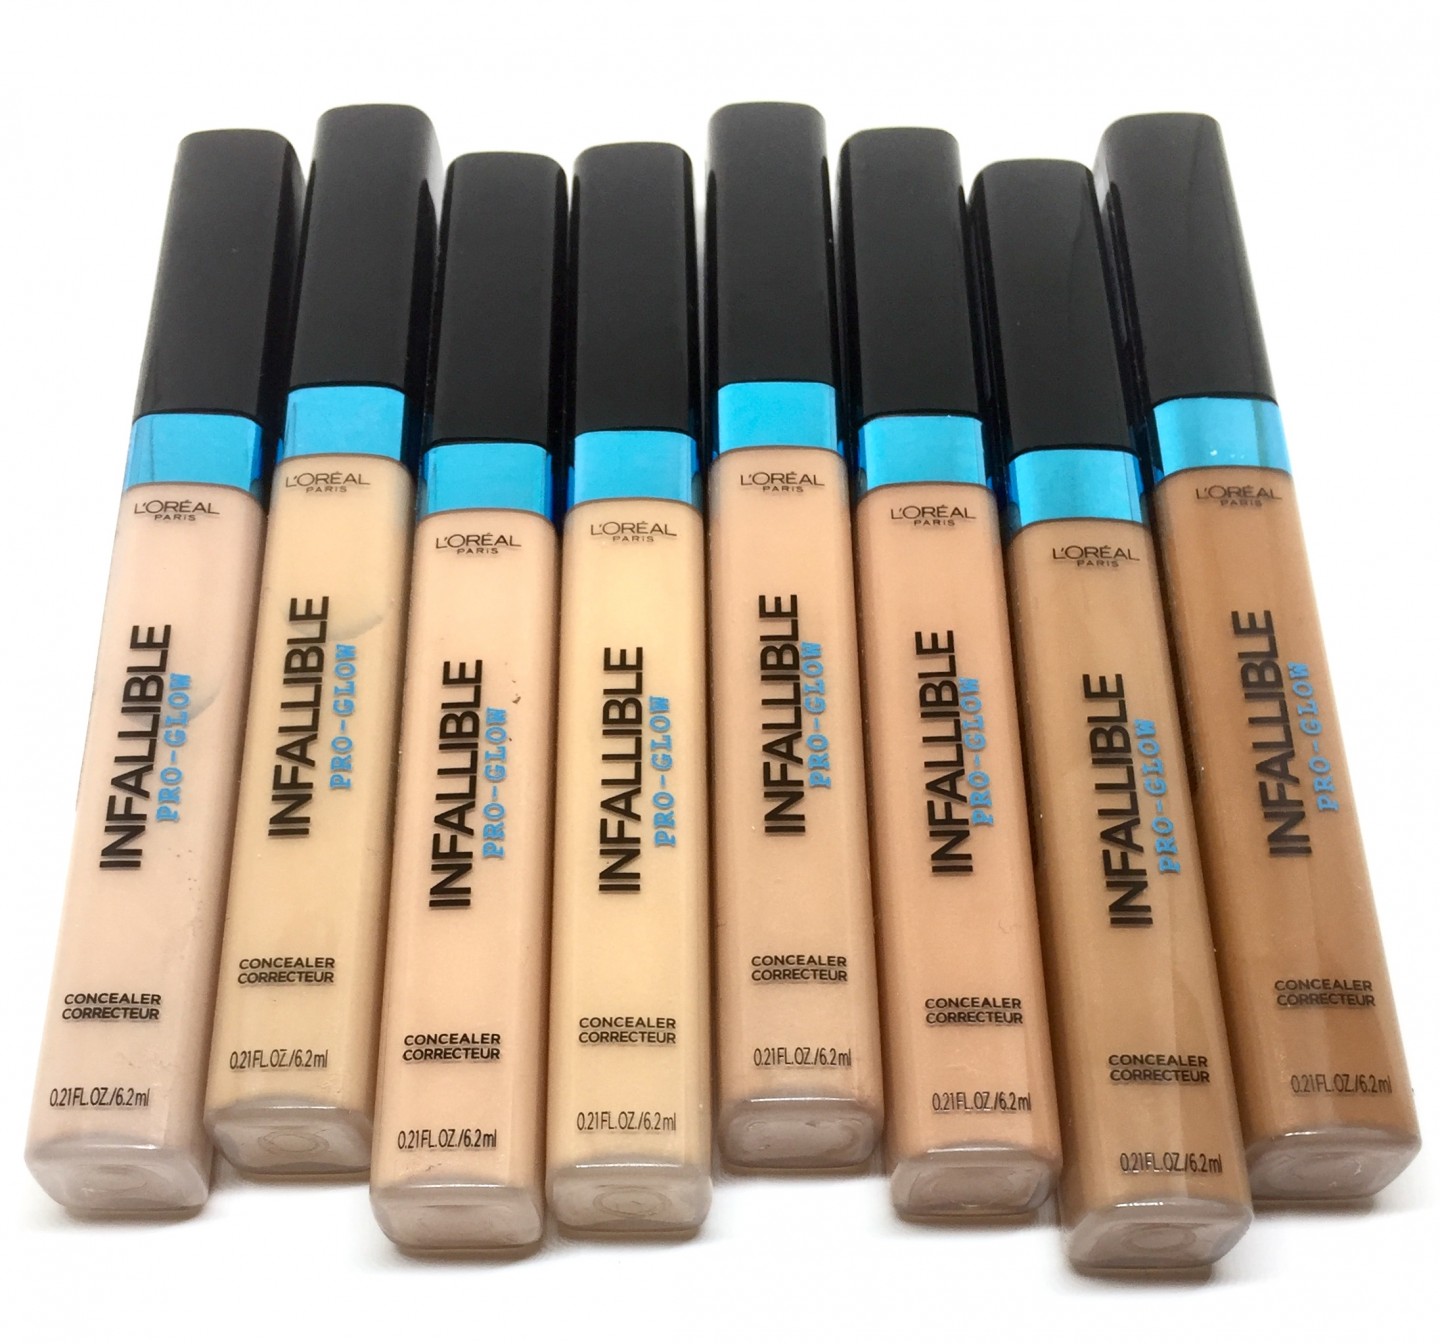 L’OREAL Infallible ProGlow Concealers